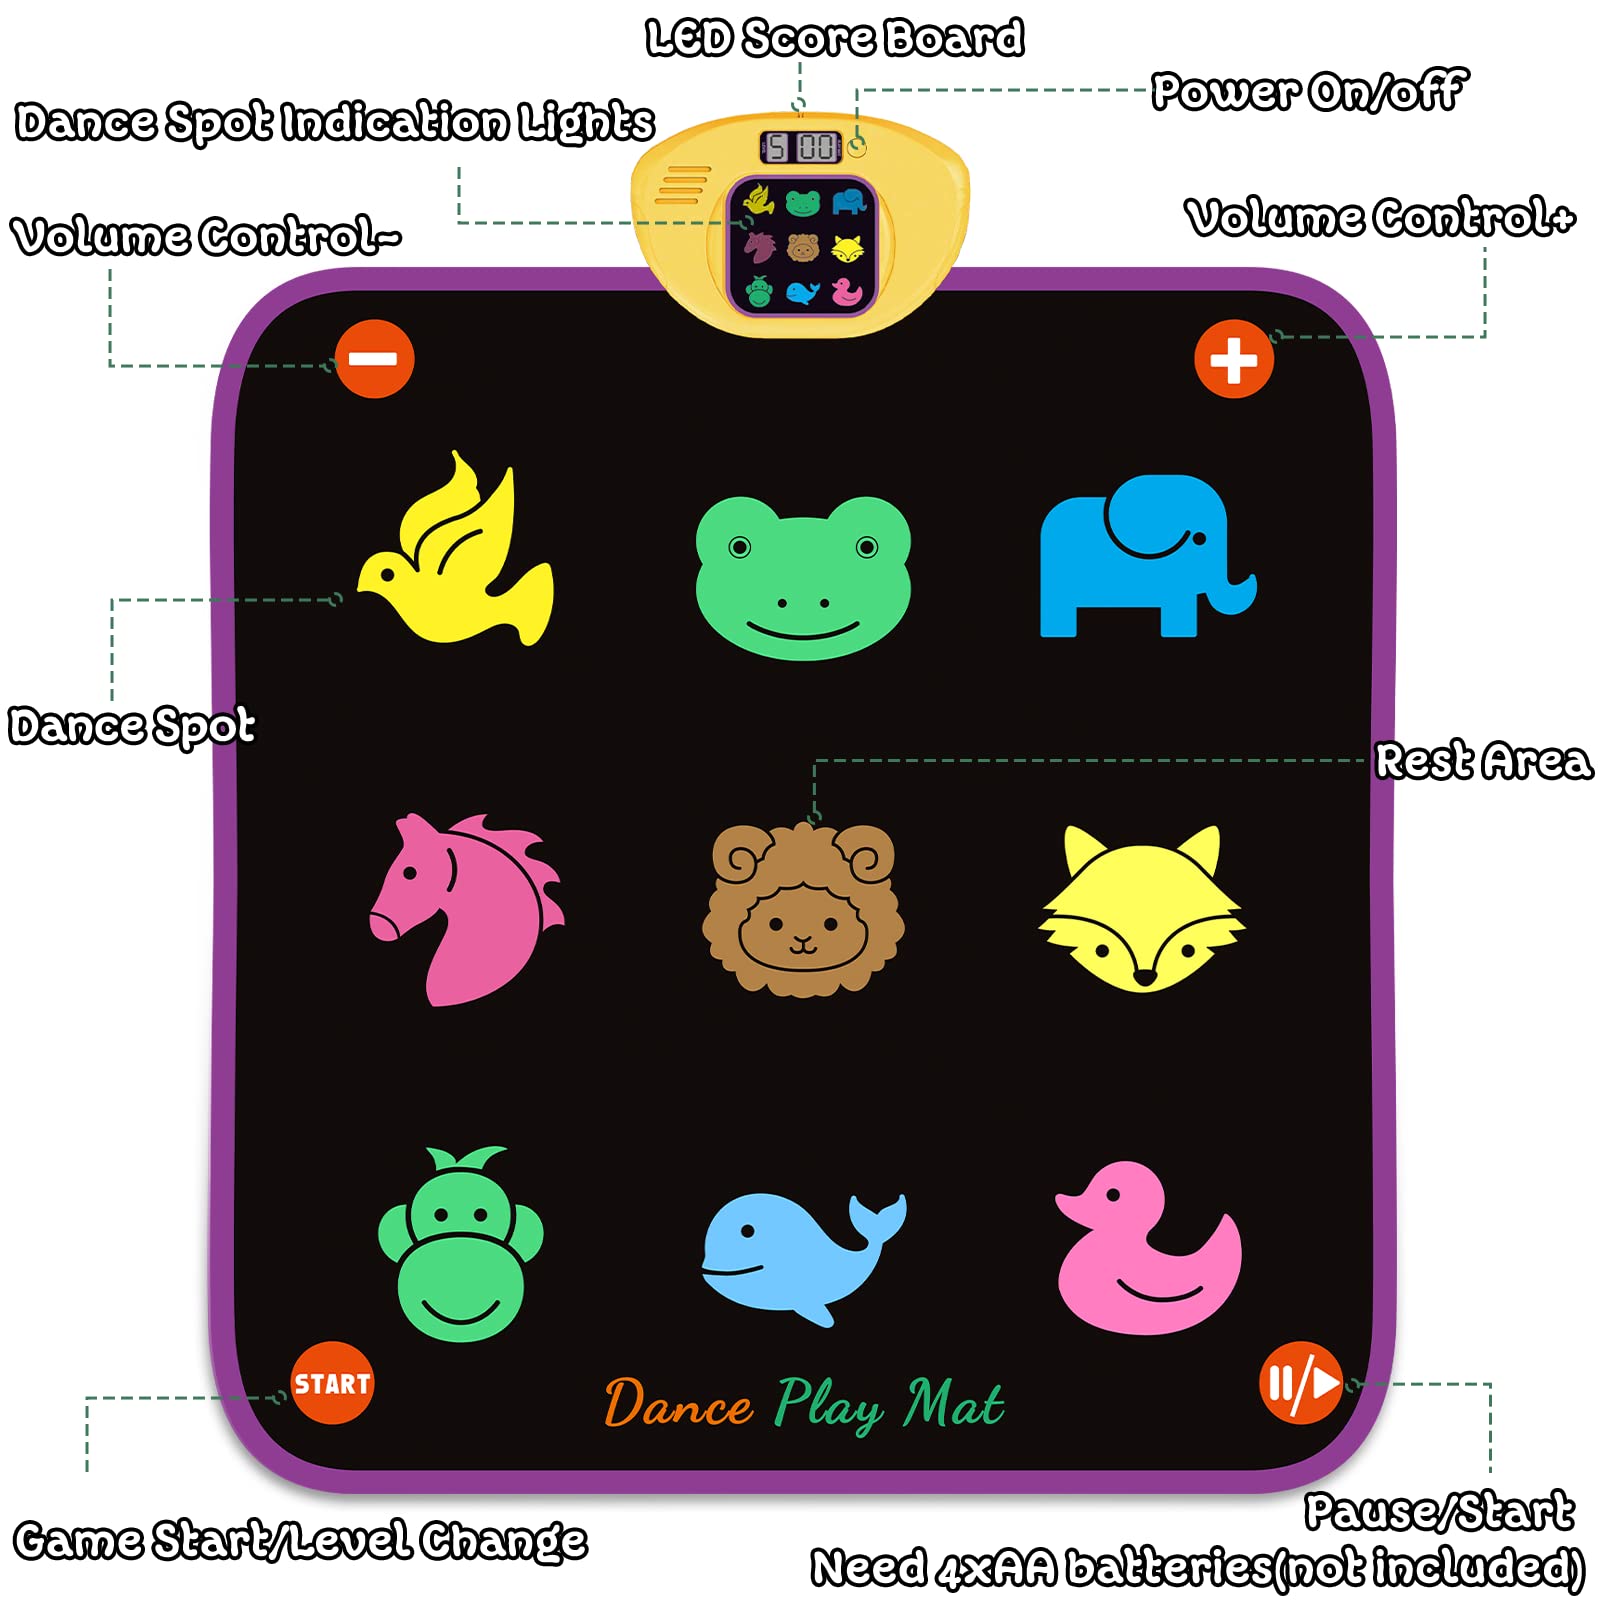 Luminous Dance Mat for Kids, Great Volume Control, Small Animal Dance Pad with 5 Gaming Modes, Large Size 35'' X 40'', Ideas Birthday Gifts for Age 5+ Year Old